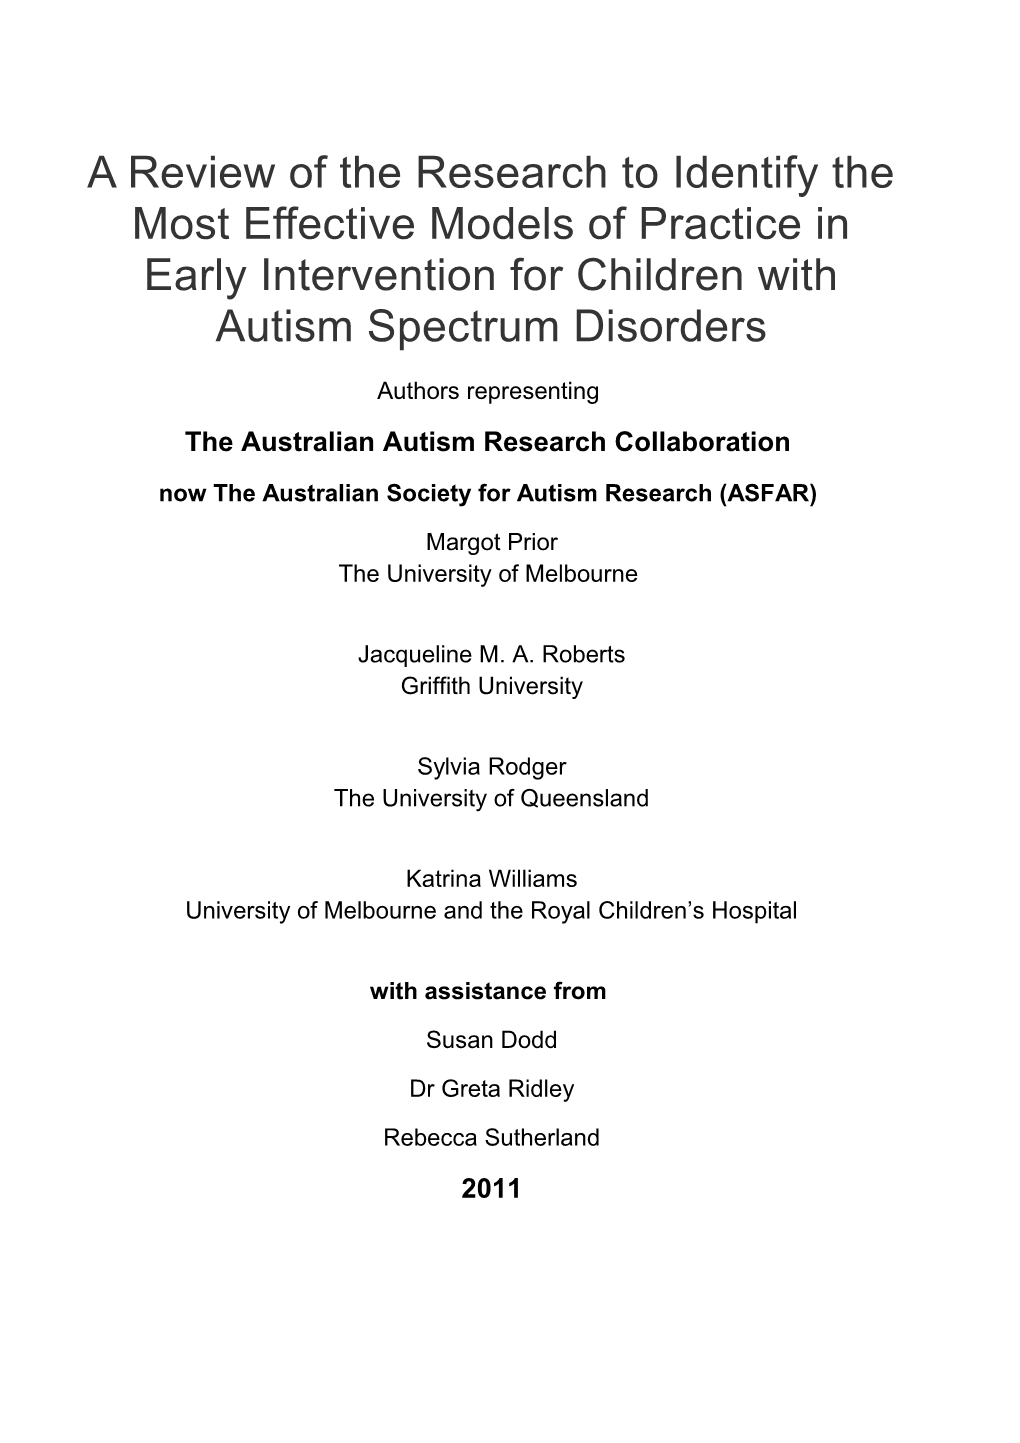 The Australian Autism Research Collaboration